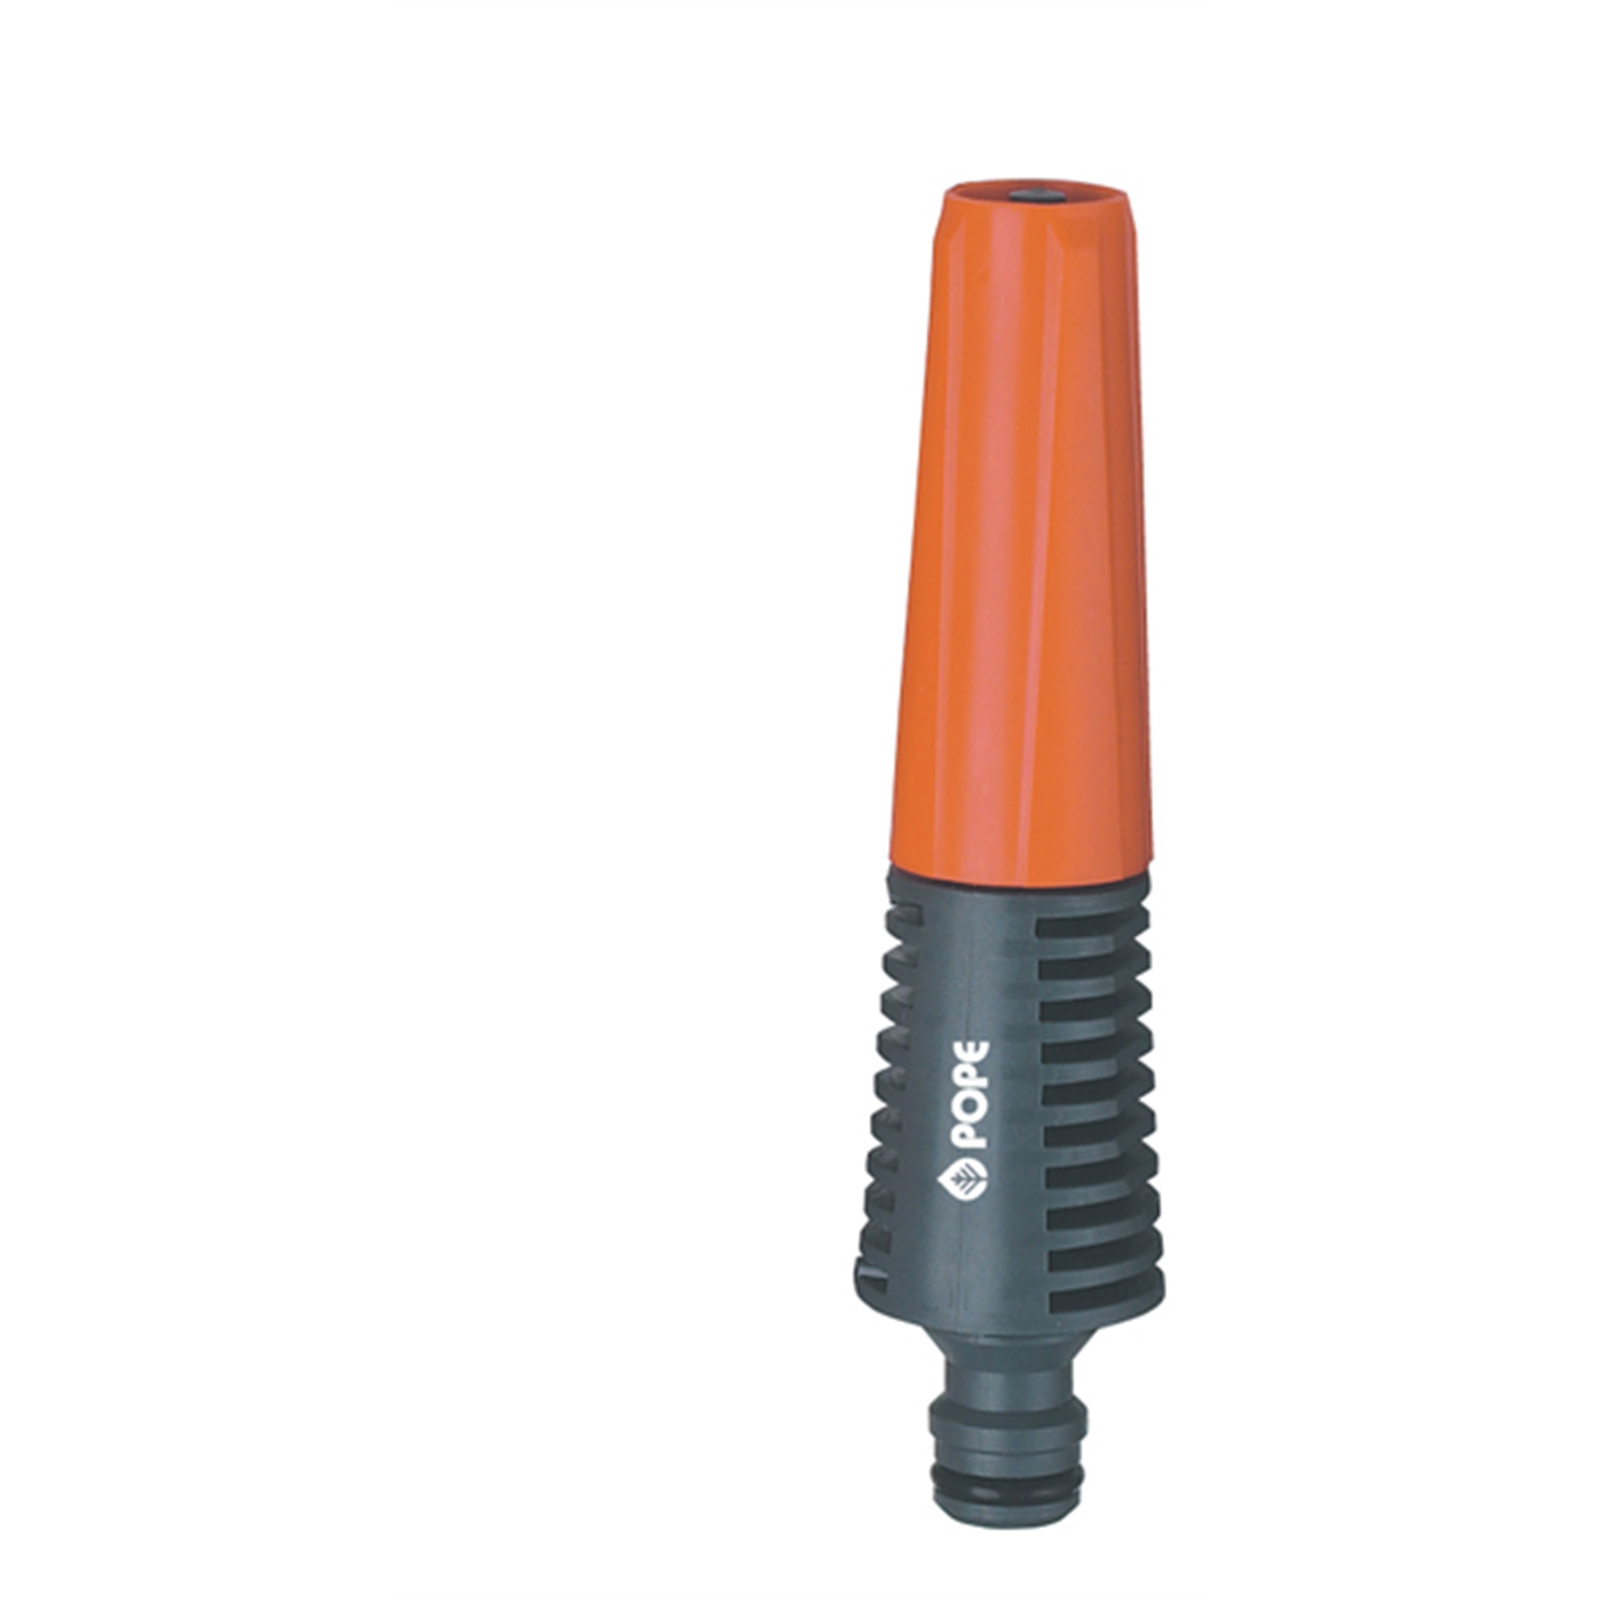 Pope 12mm Plastic Adjustable Snap-on Hose End Nozzle